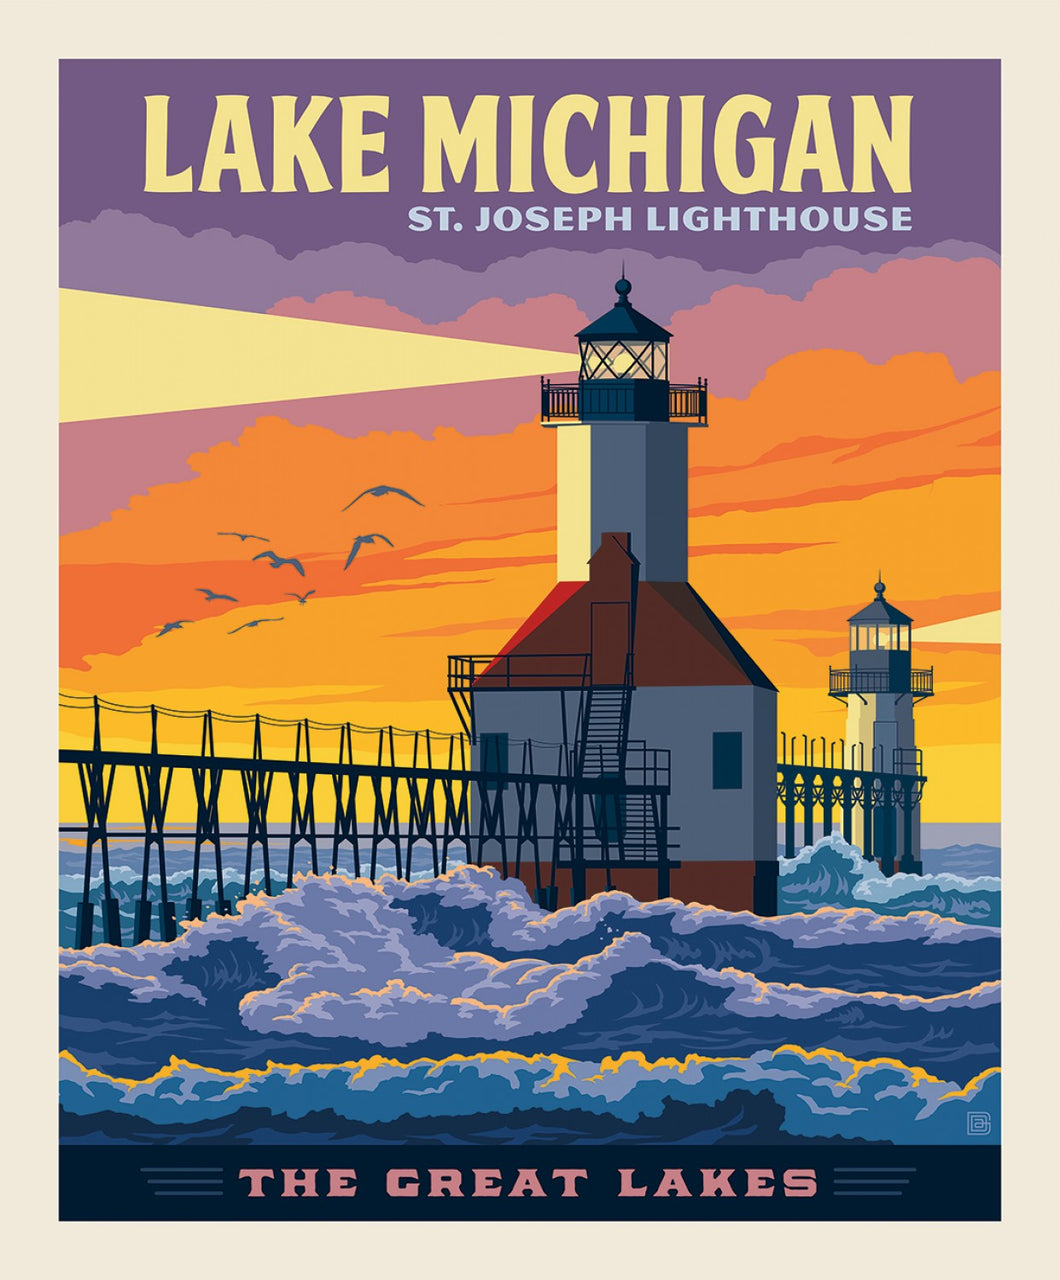 Destinations State Pride and Great Lakes collections